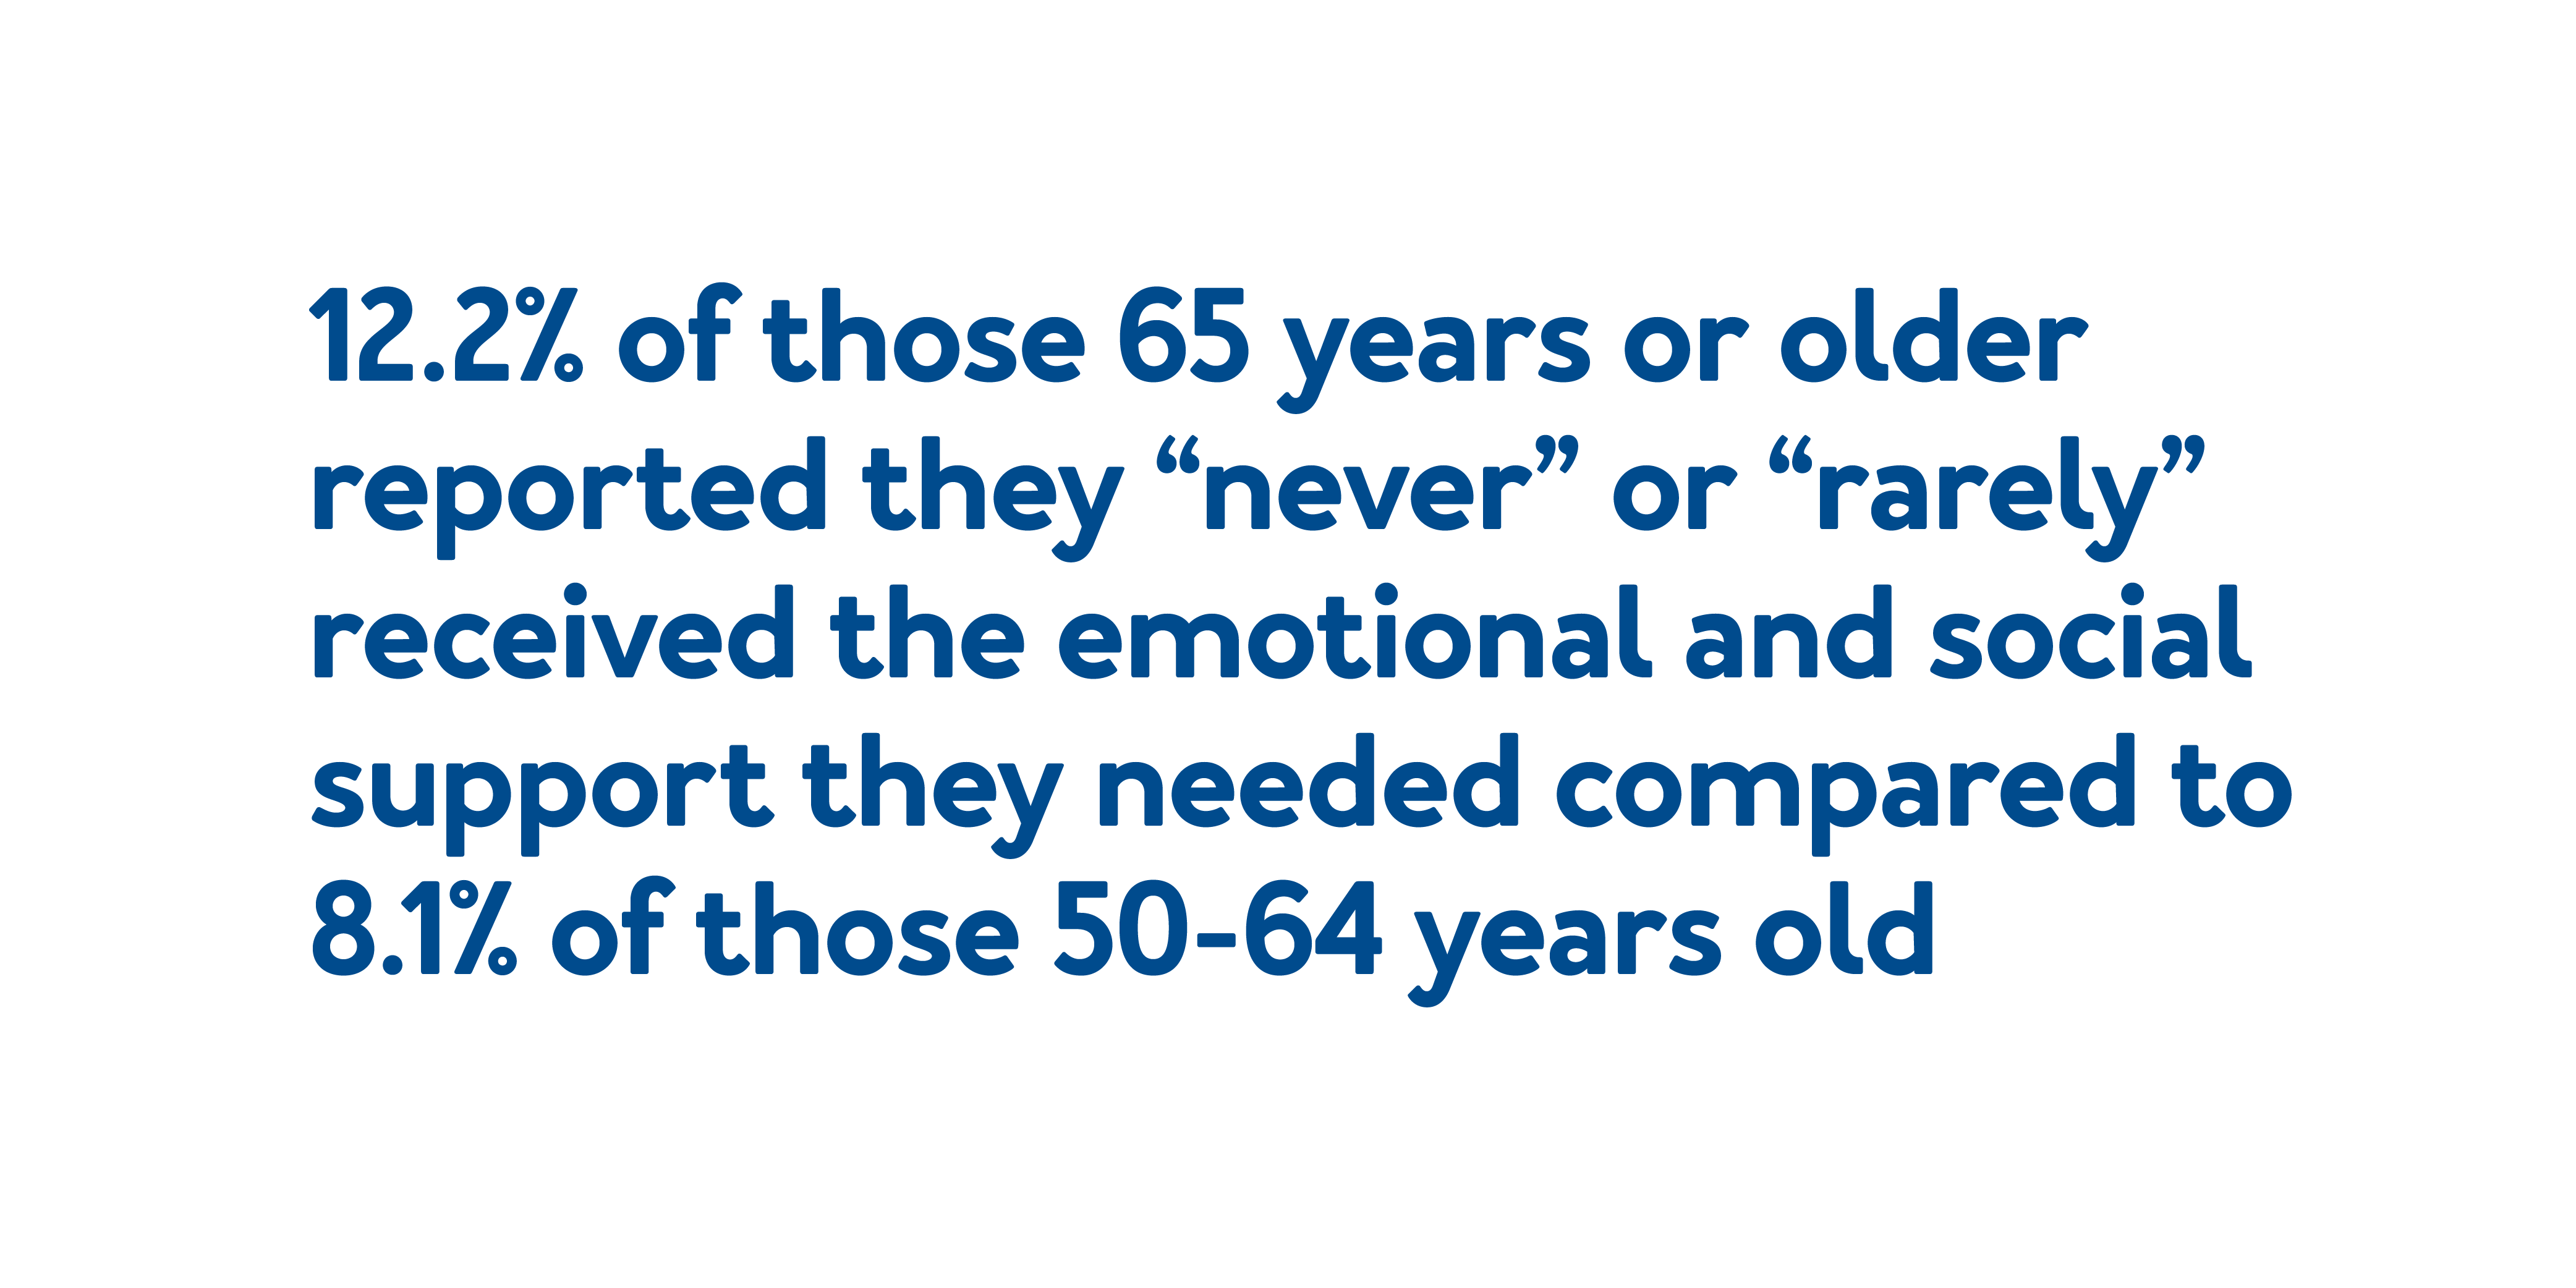 12.2% of those 65 years or older reported they “never” or “rarely” received the emotional and social support they needed compared to 8.1% of those 50-64 years old.